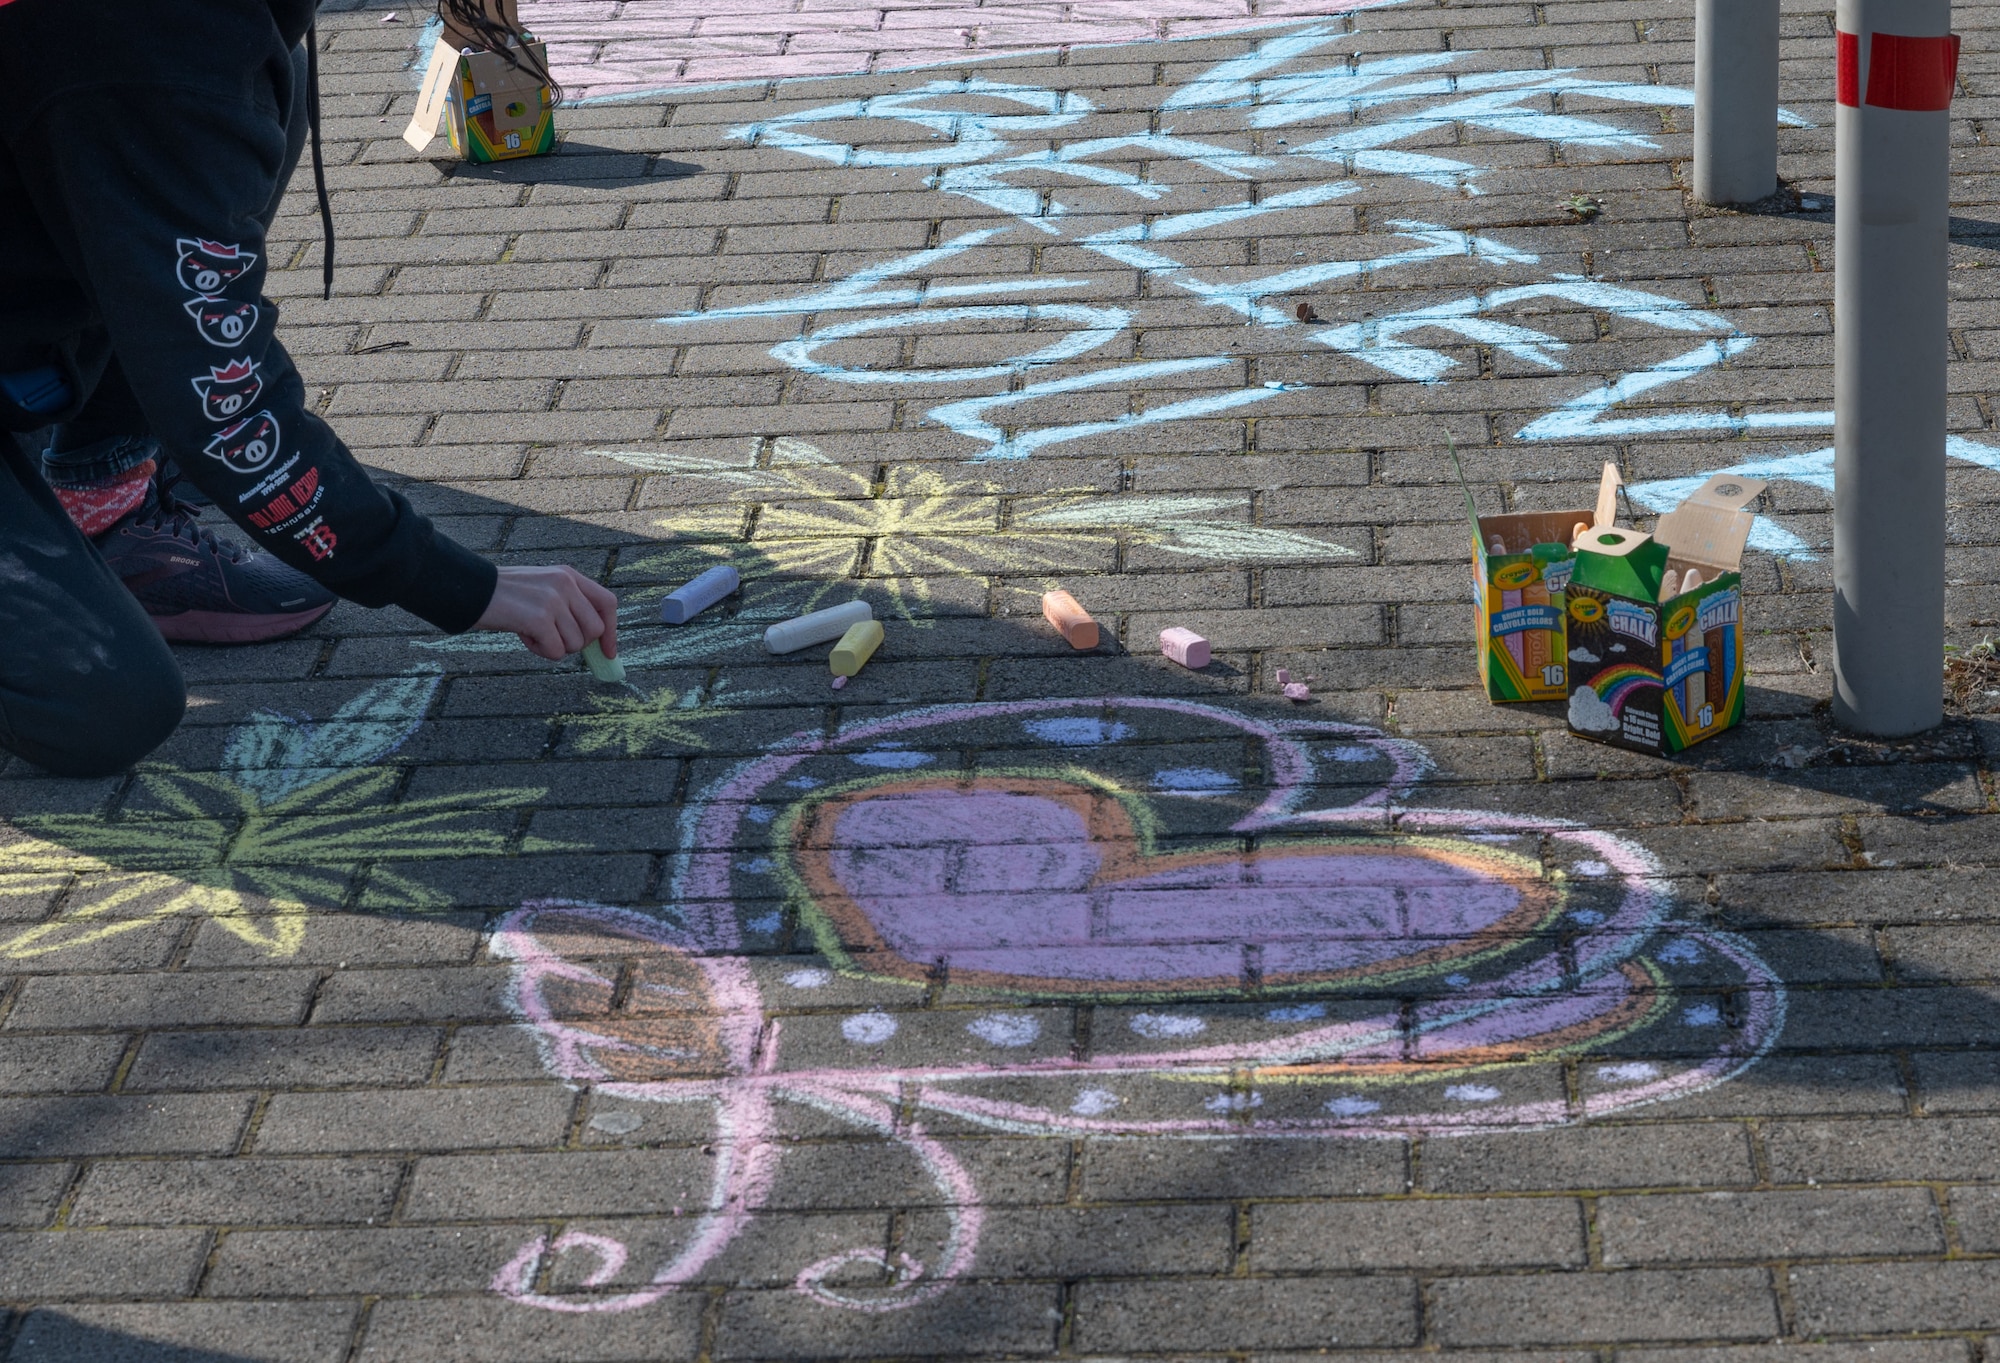 Volunteers decorate the entrance point of a Volksmarch event, a sexual assault awareness walk and fair, at Ramstein Air Base, Germany, April 6, 2023. The artwork colored the ground and had words of affirmation and inspiration. (U.S. Air Force photo by Senior Airman Andrew Bertain)